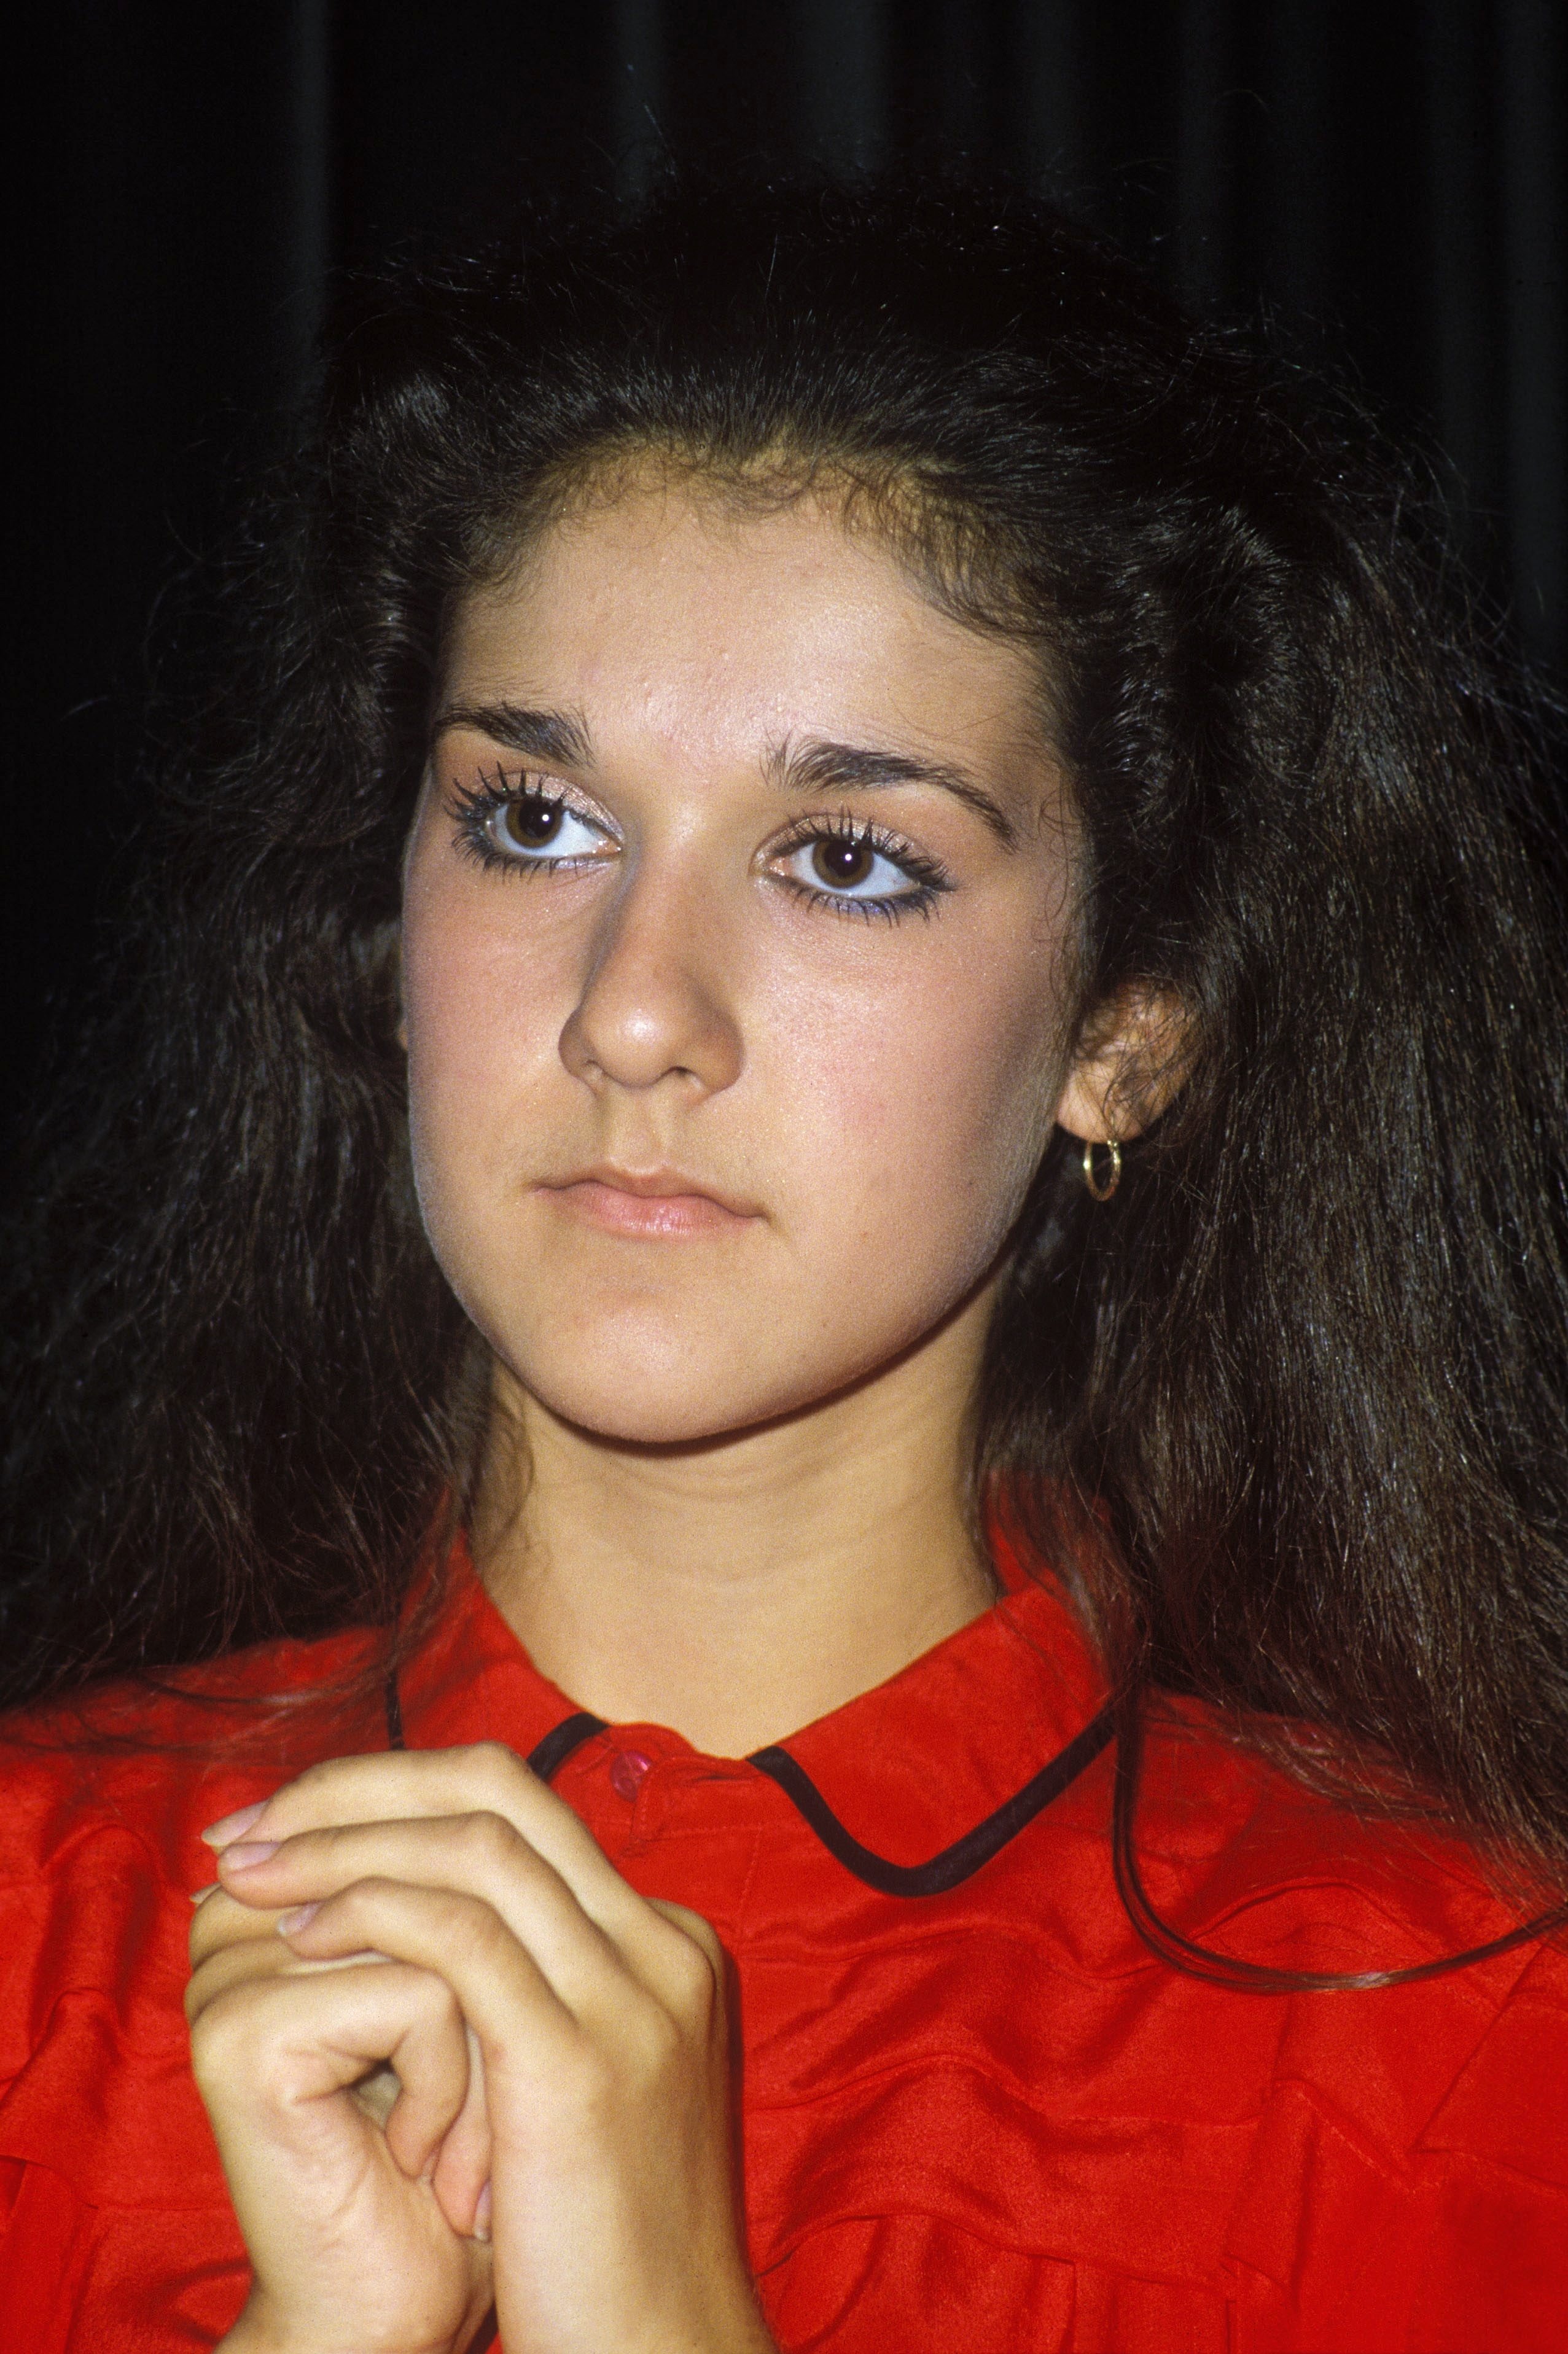 Nine Things You Probably Didn't Know About Superstar Celine Dion